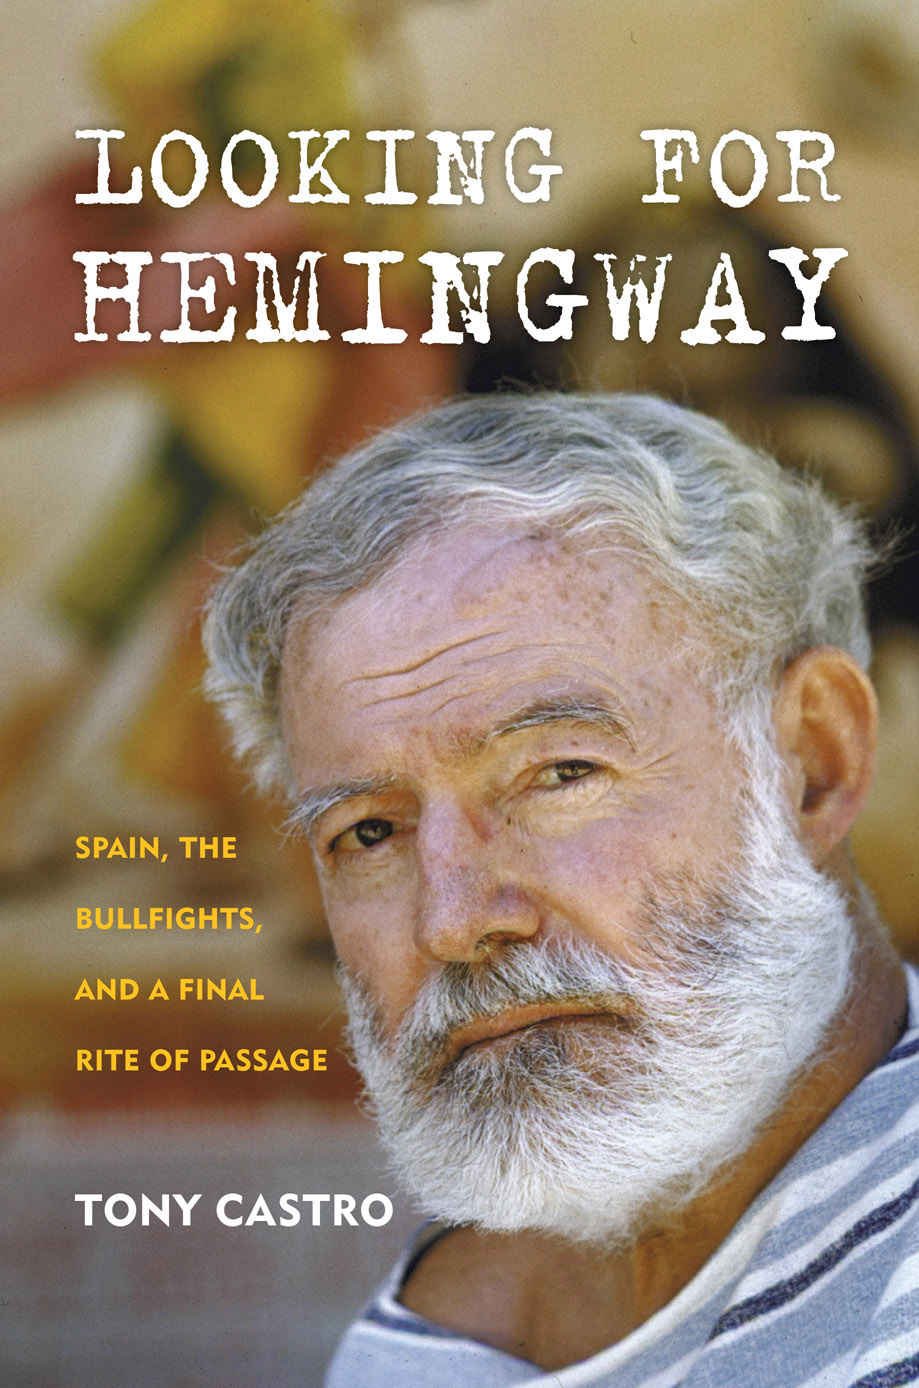 Looking for Hemingway, Author Signed Softcover